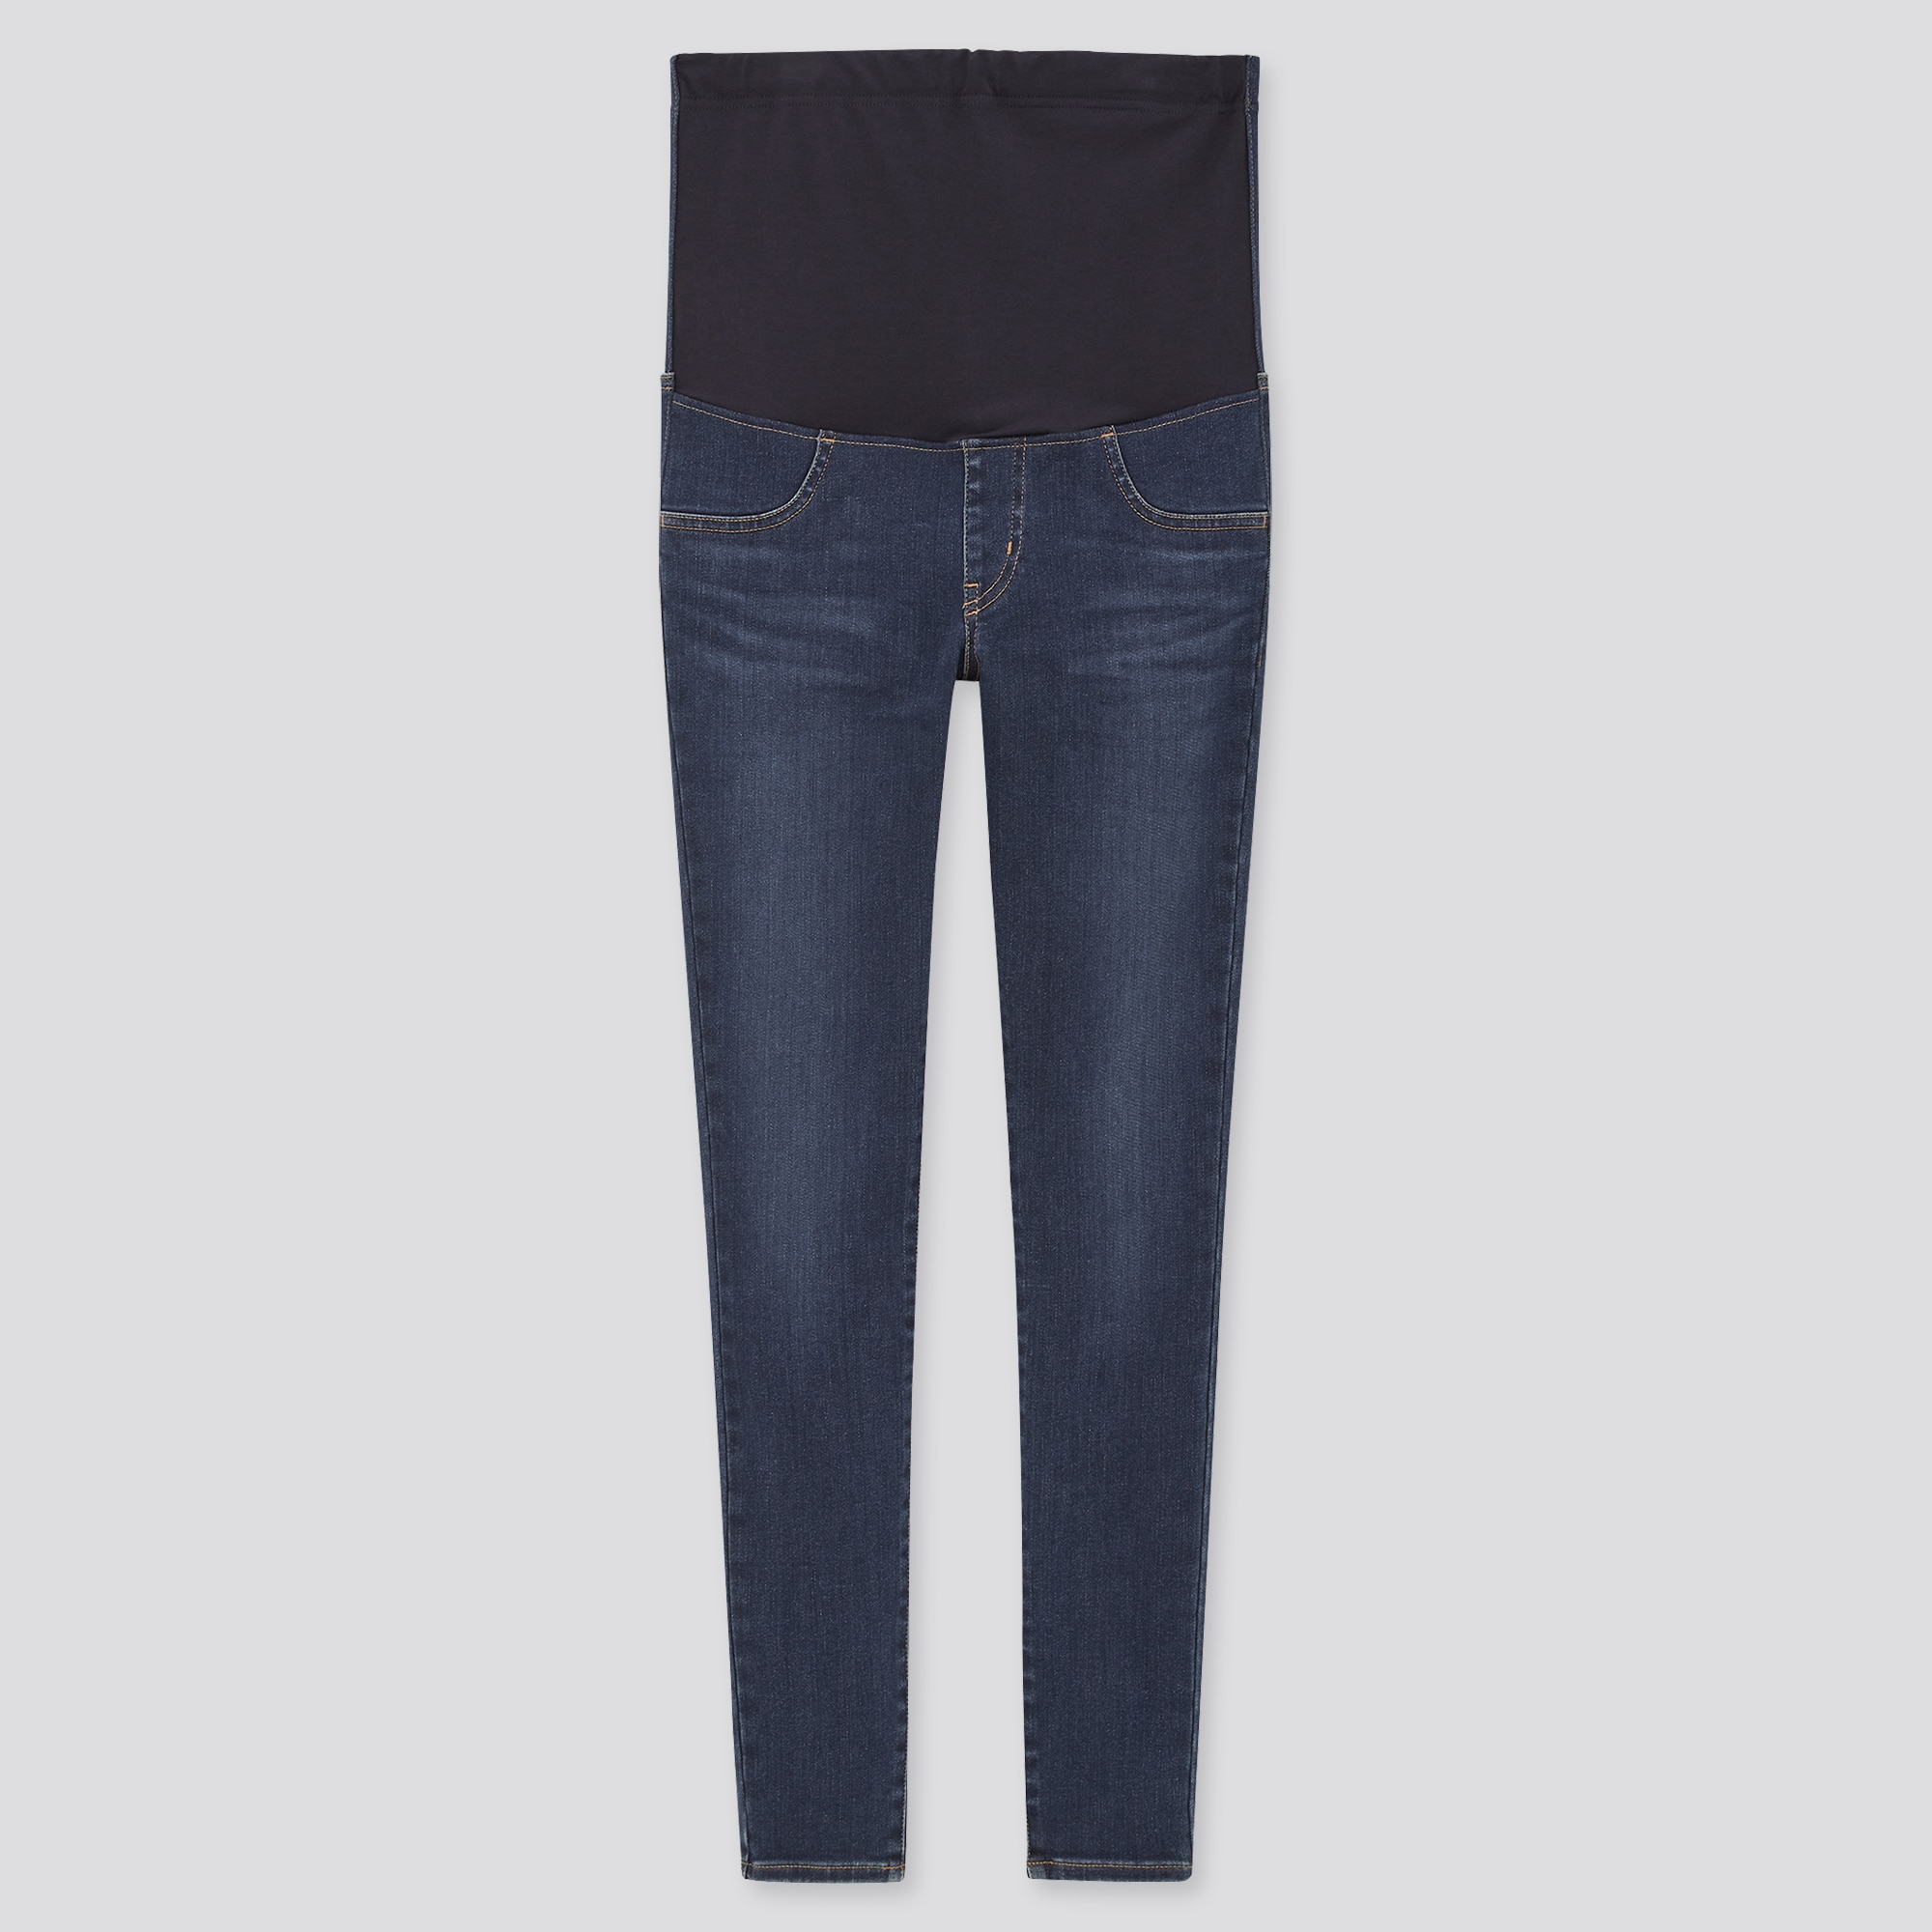 uniqlo baggy jeans